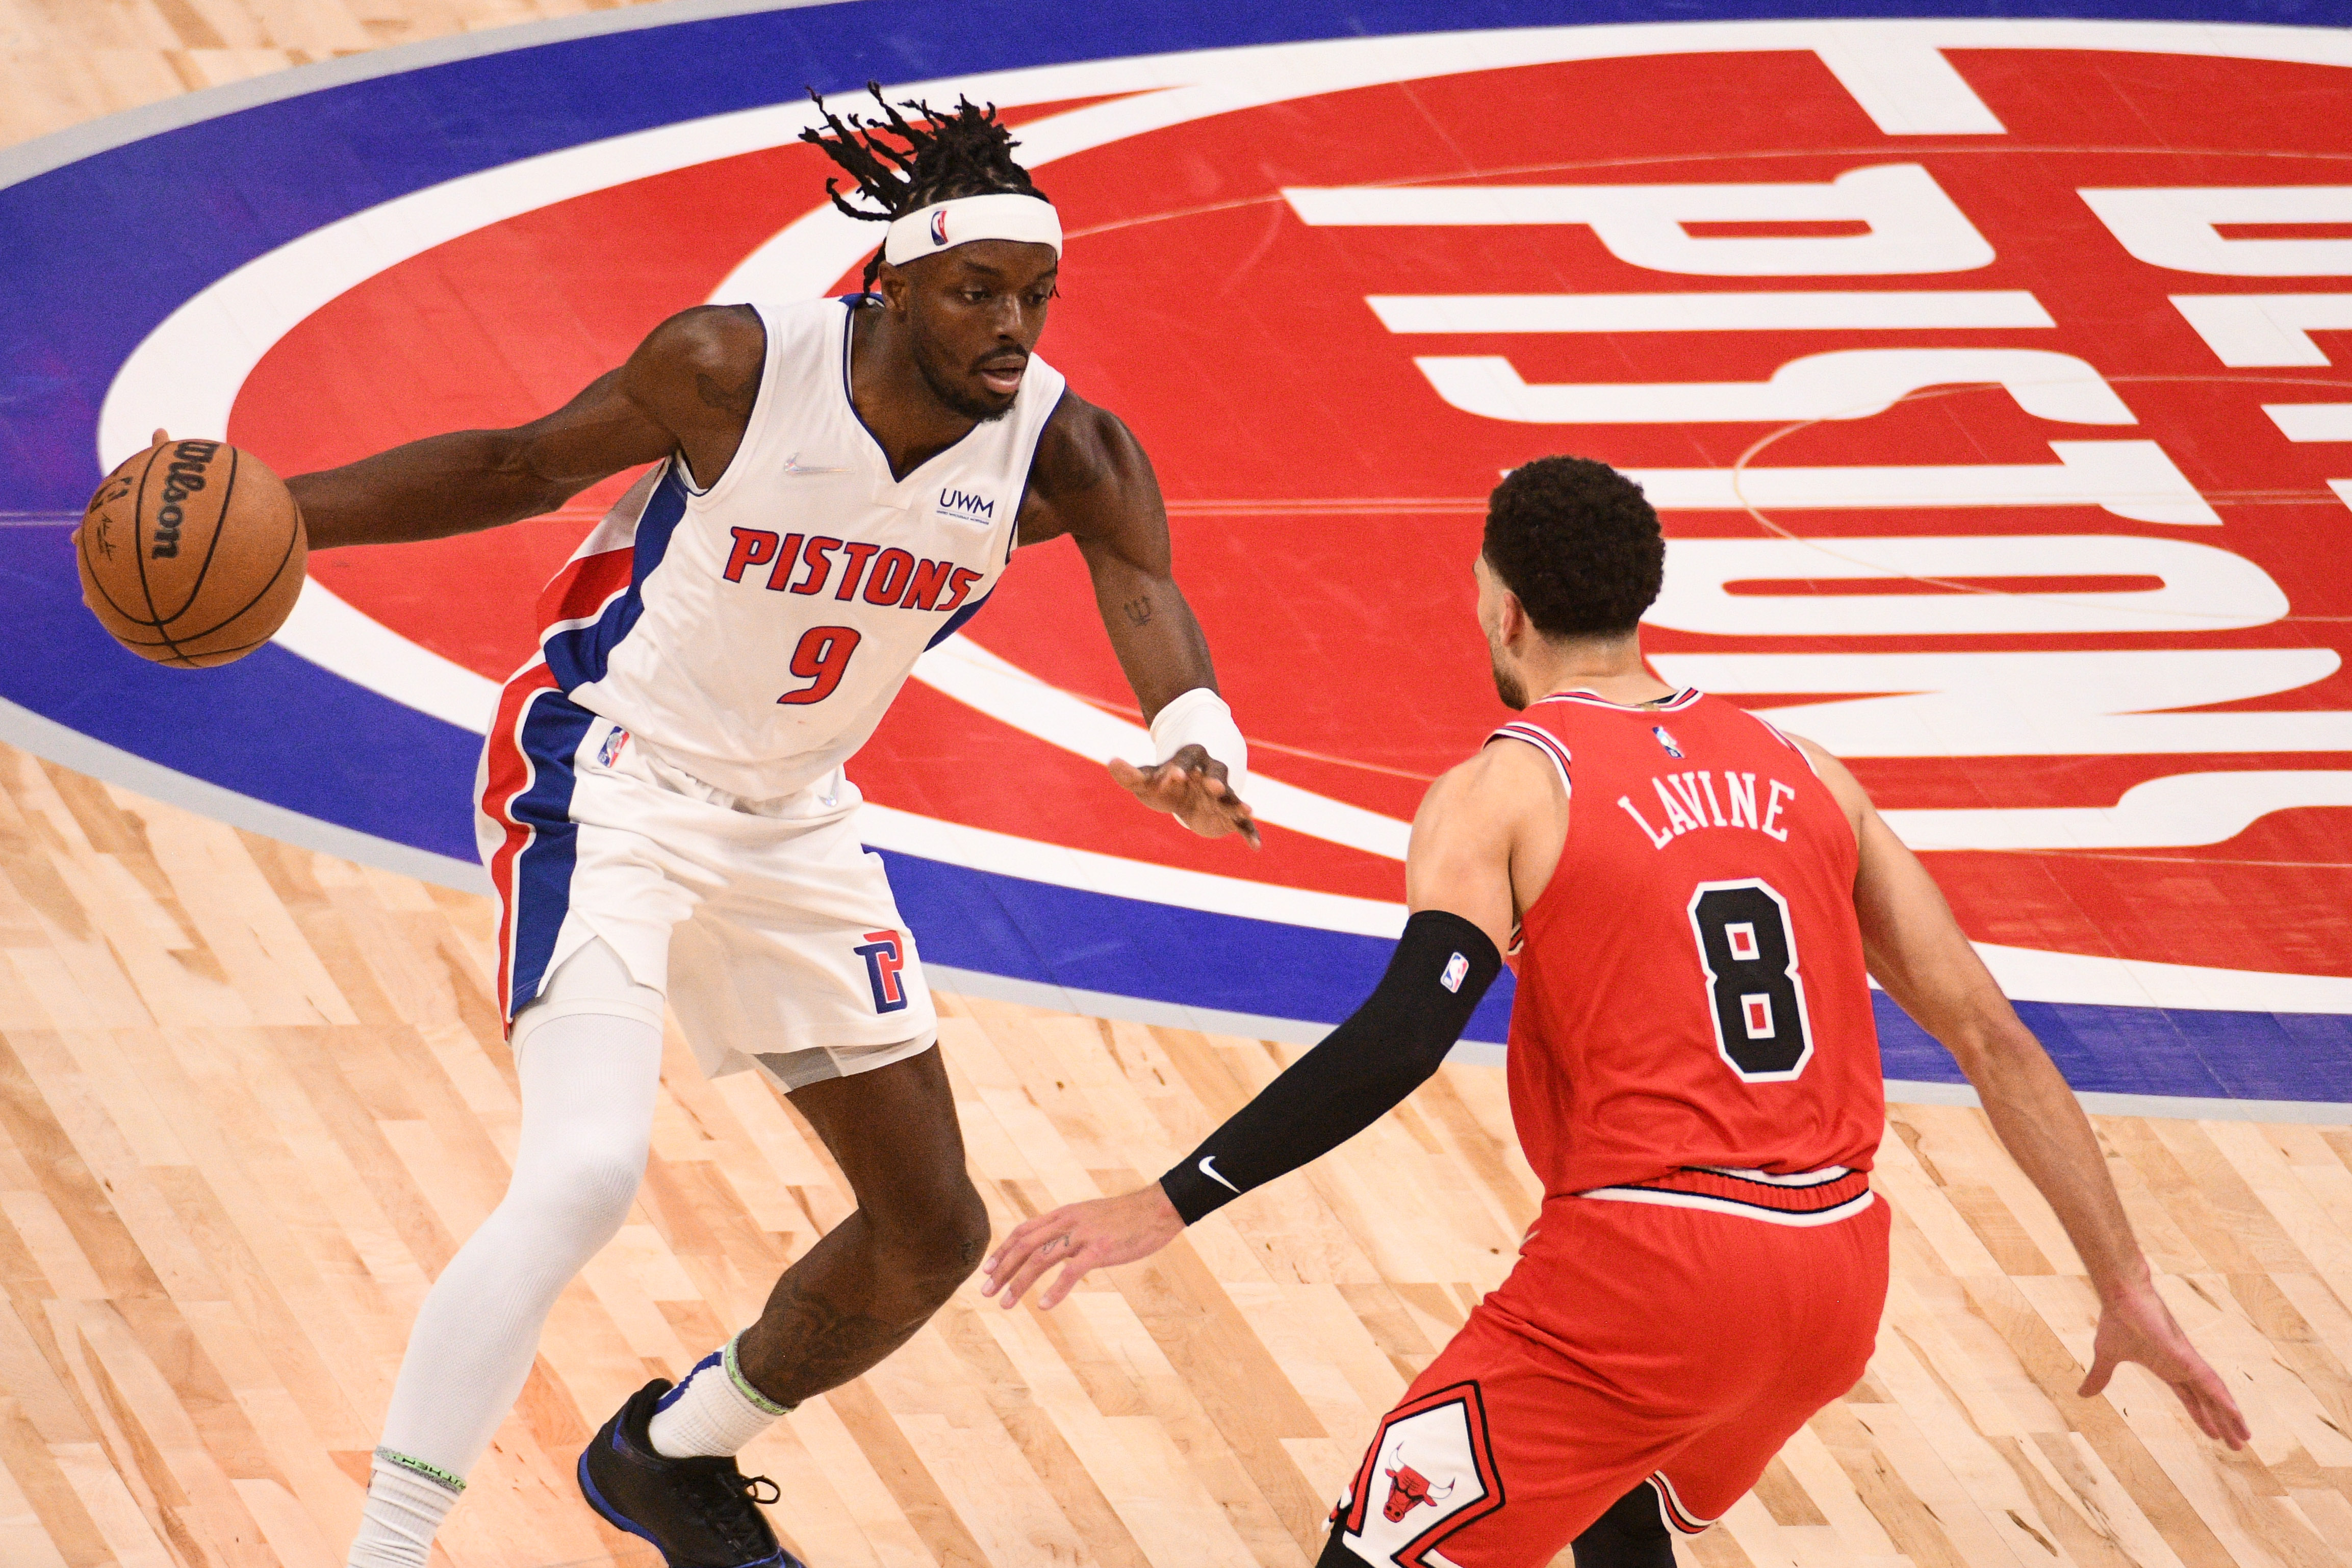 Oct 20, 2021; Detroit, Michigan, USA; Detroit Pistons forward Jerami Grant (9) drives to the basket as Chicago Bulls guard Zach LaVine (8) defends during the game at Little Caesars Arena. Mandatory Credit: Tim Fuller-USA TODAY Sports